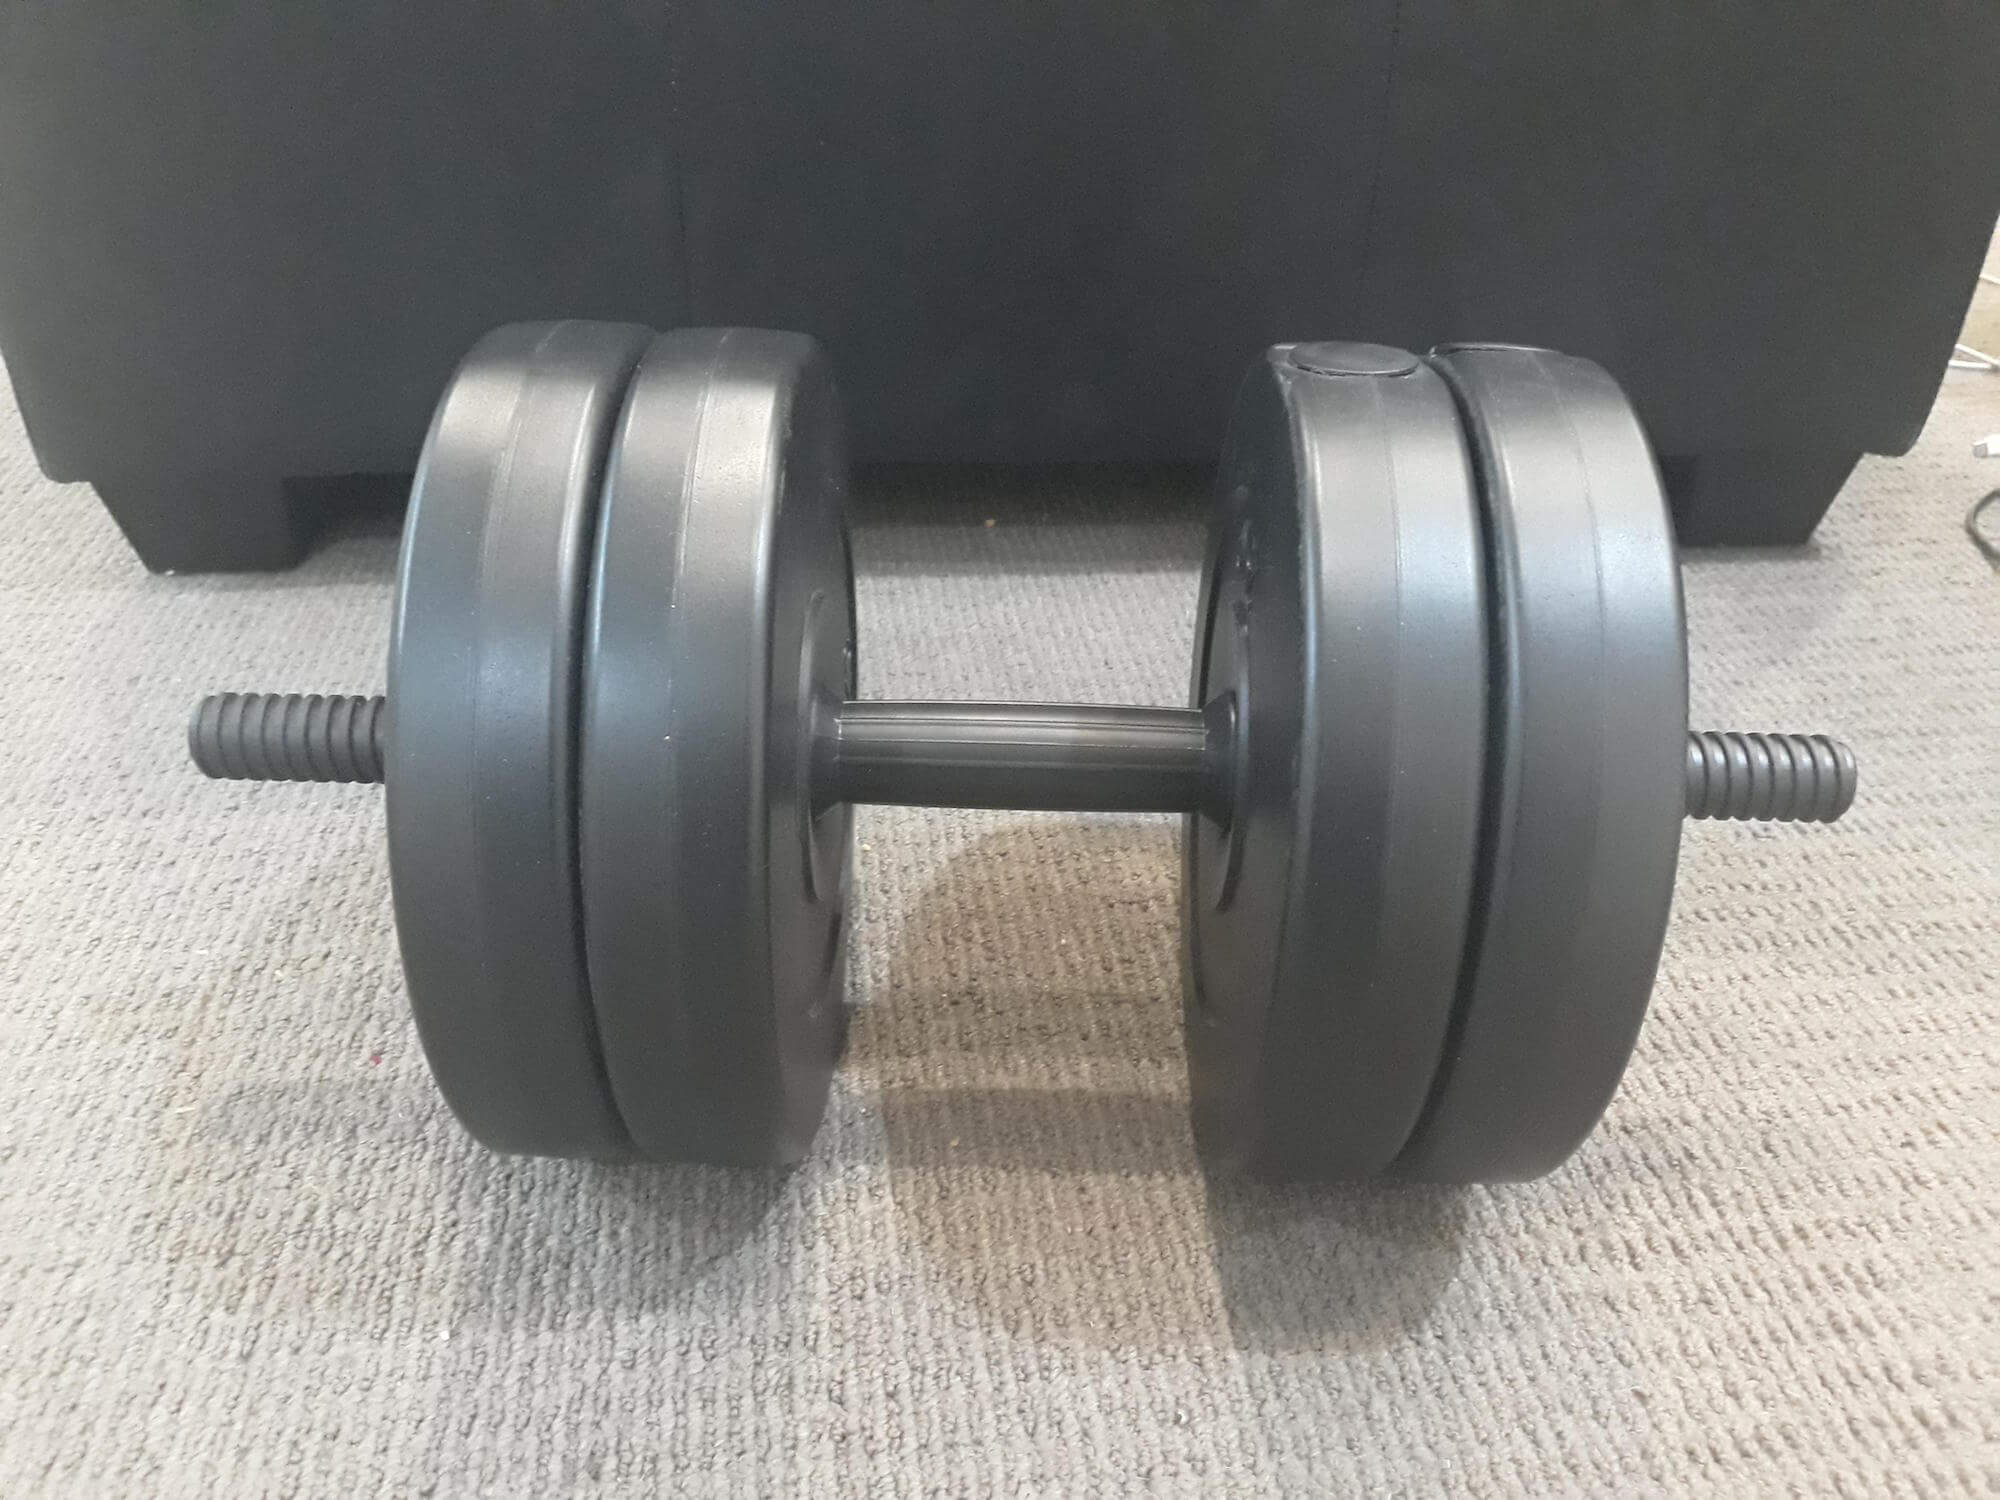 Grey weights on a small bar